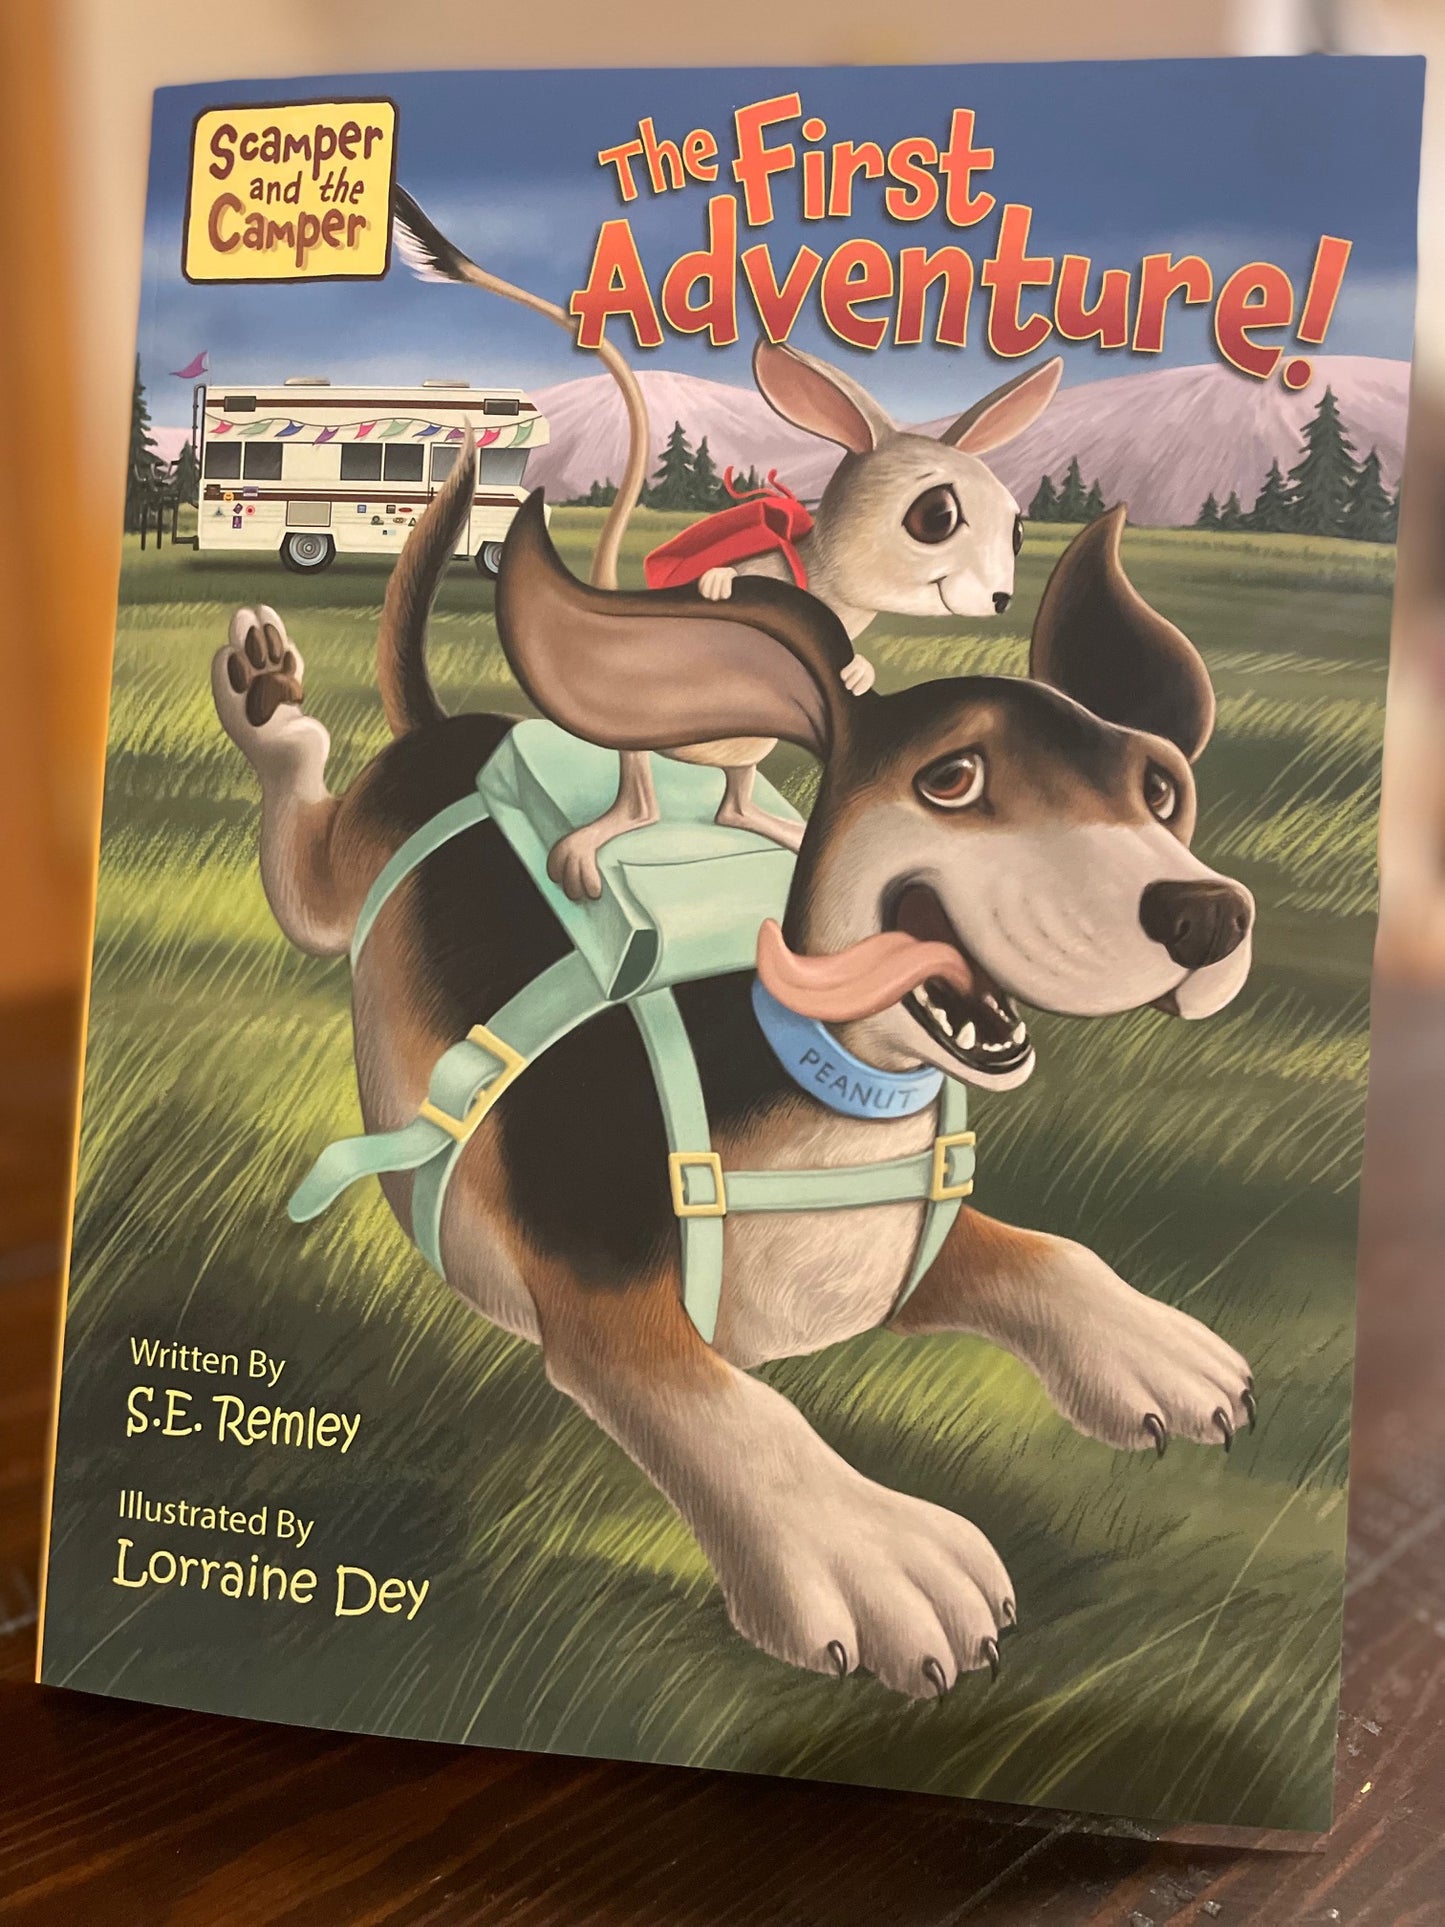 Scamper and the Camper - The First Adventure!